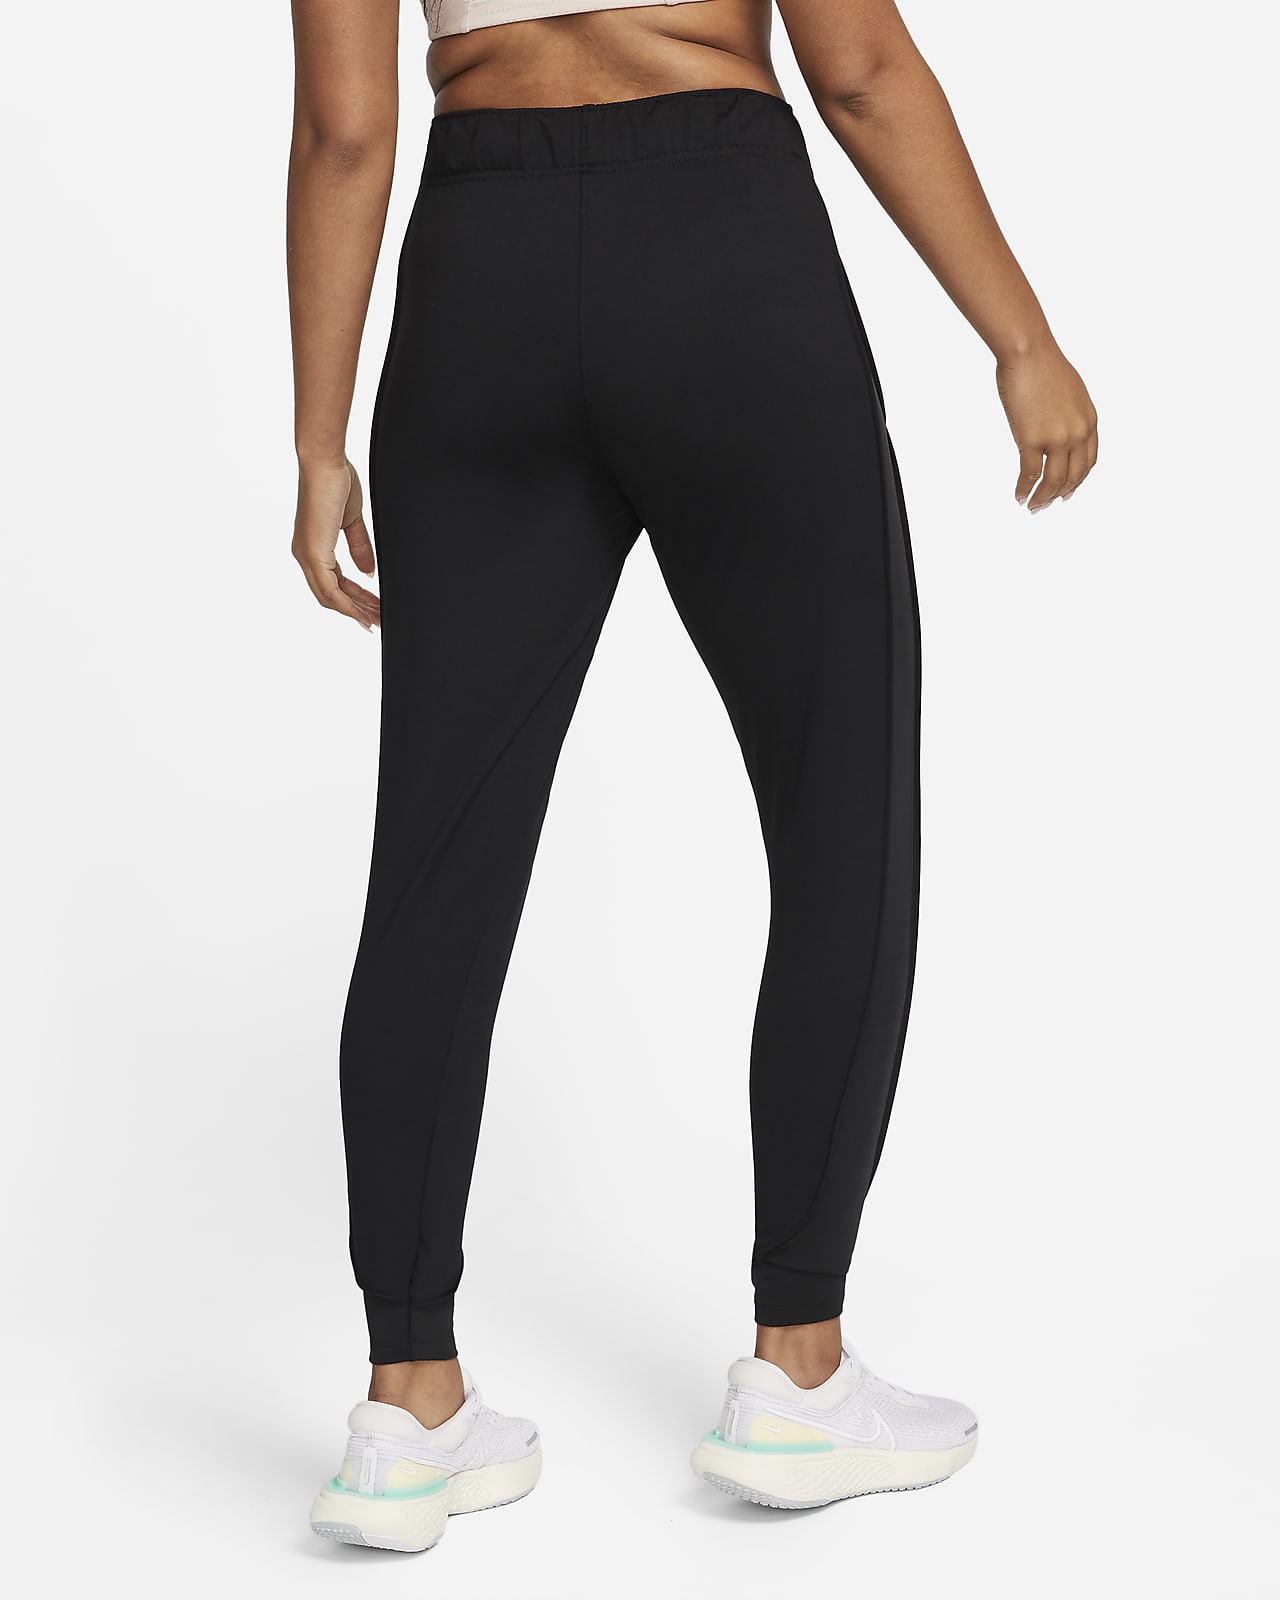  Nike Therma-FIT Essential Women's Running Pants (Medium, Black)  : Clothing, Shoes & Jewelry